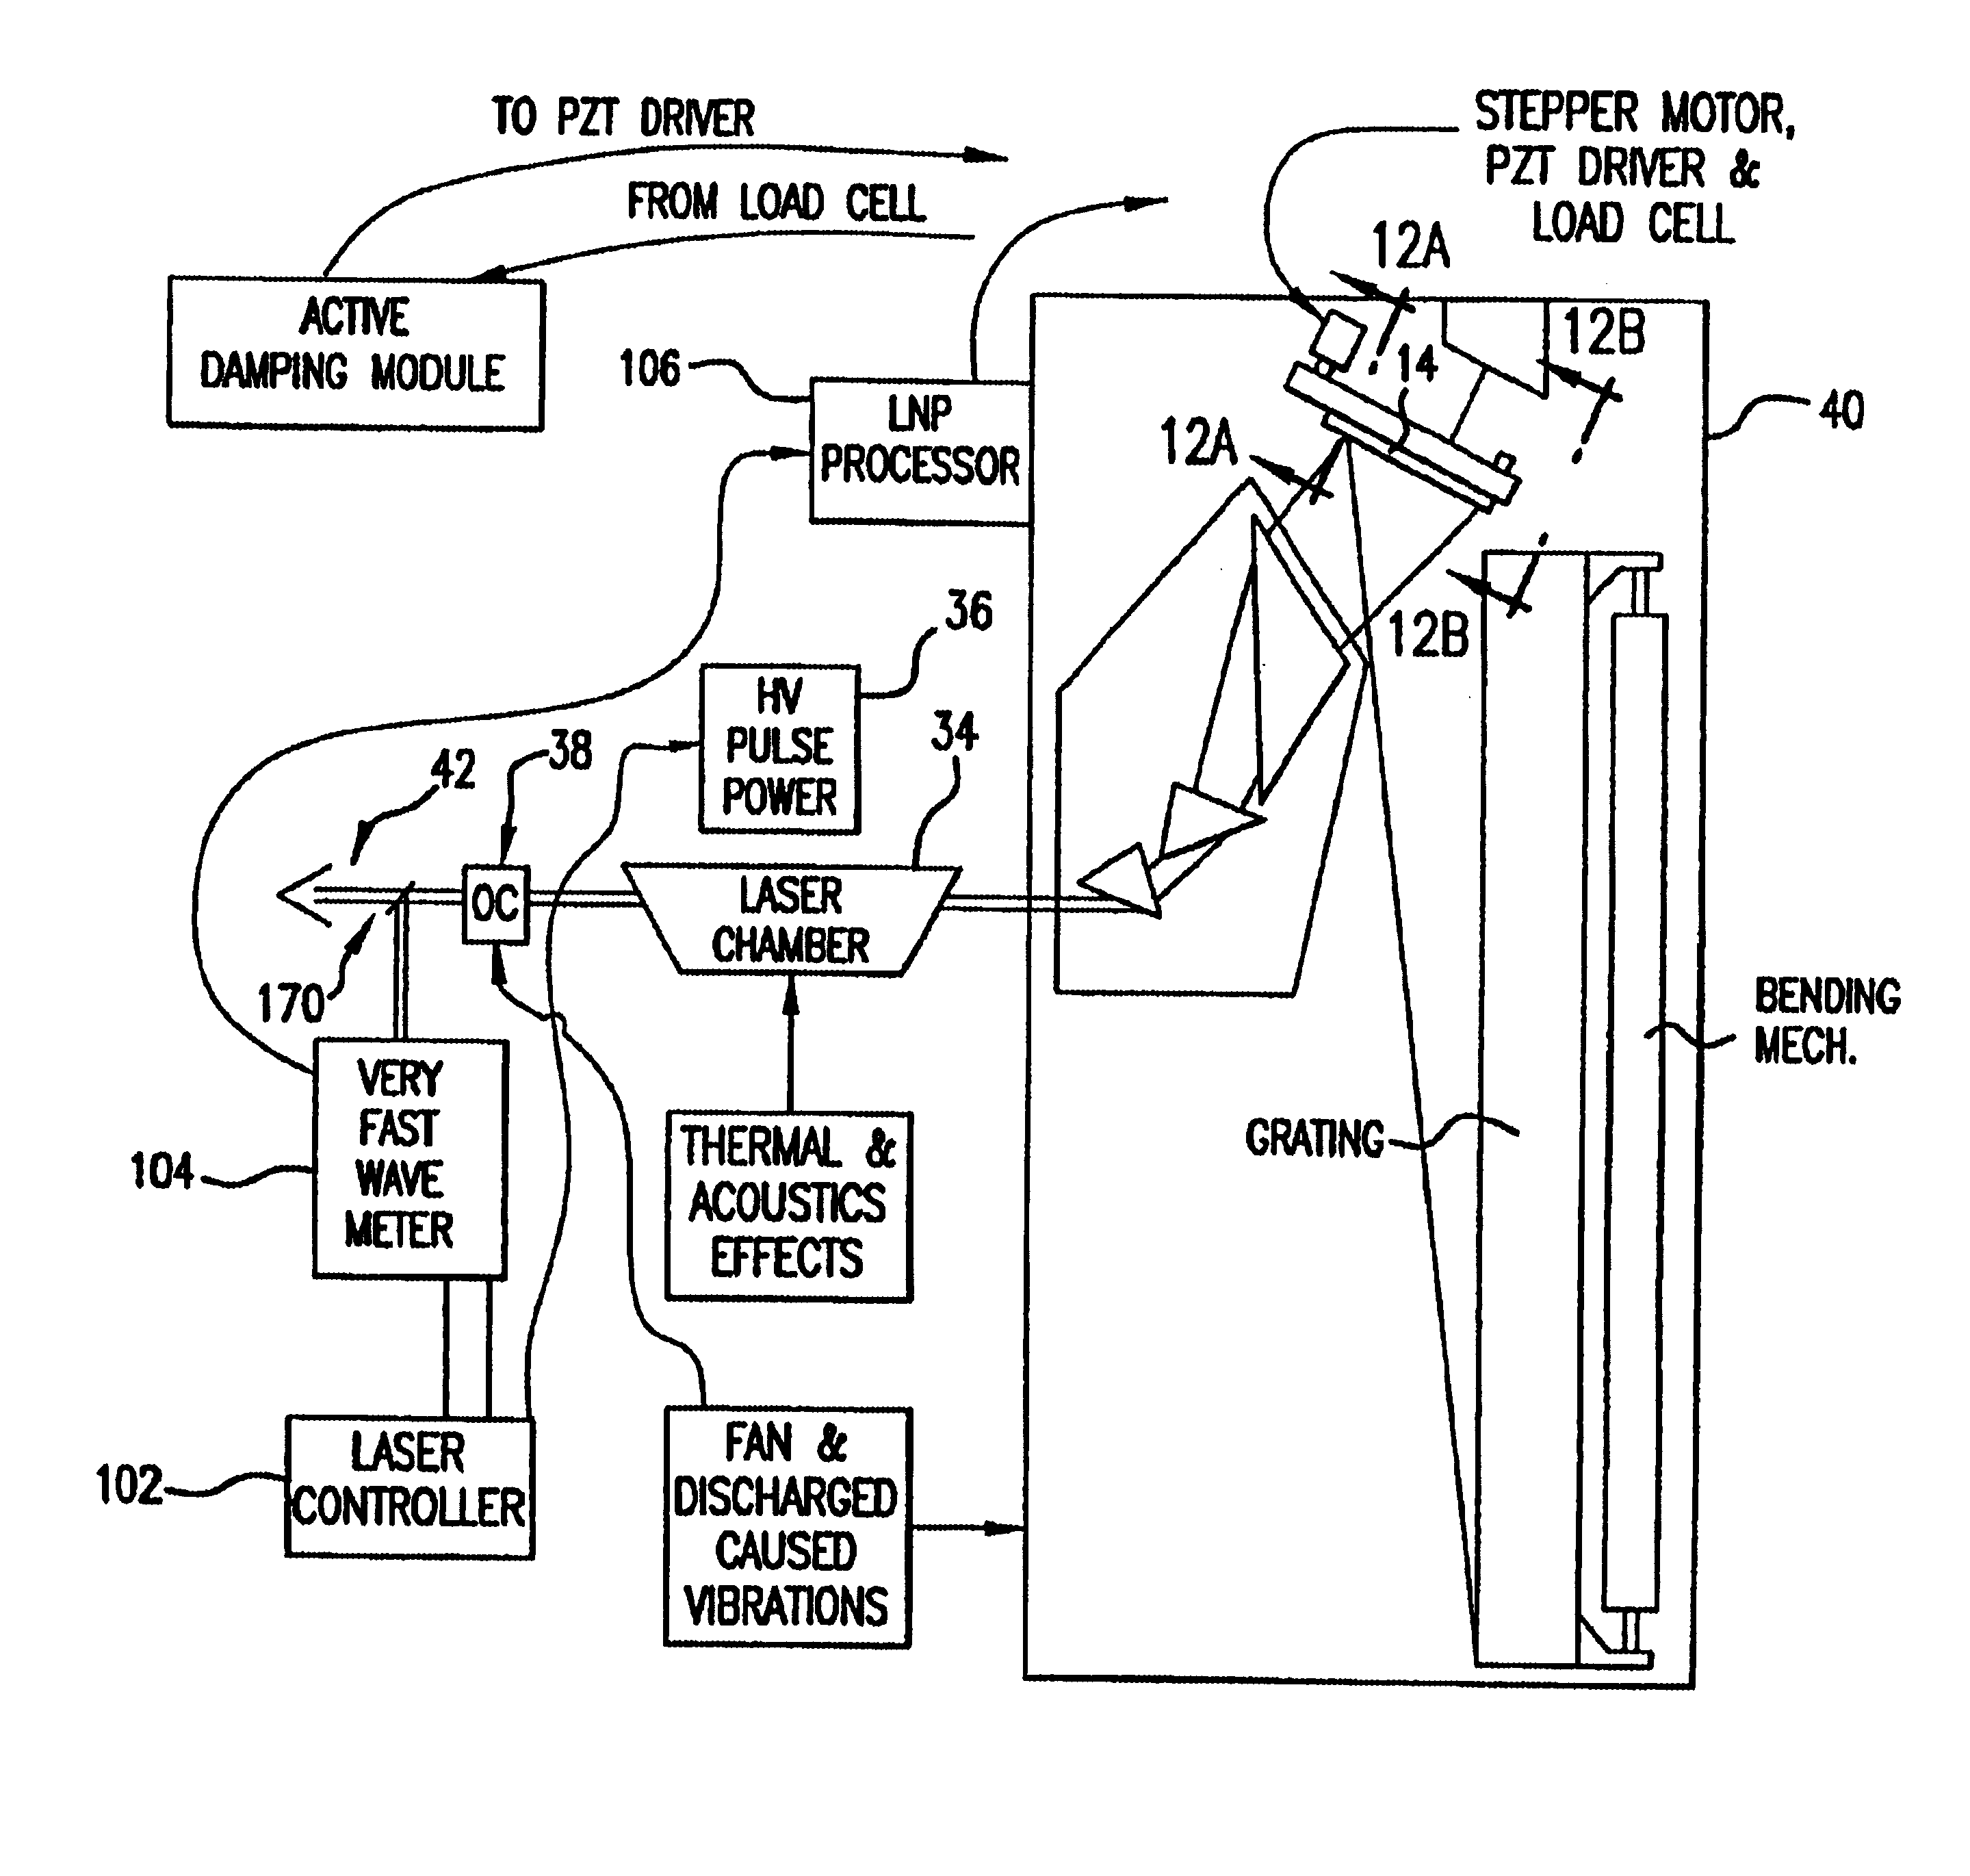 Laser wavelength control unit with piezoelectric driver